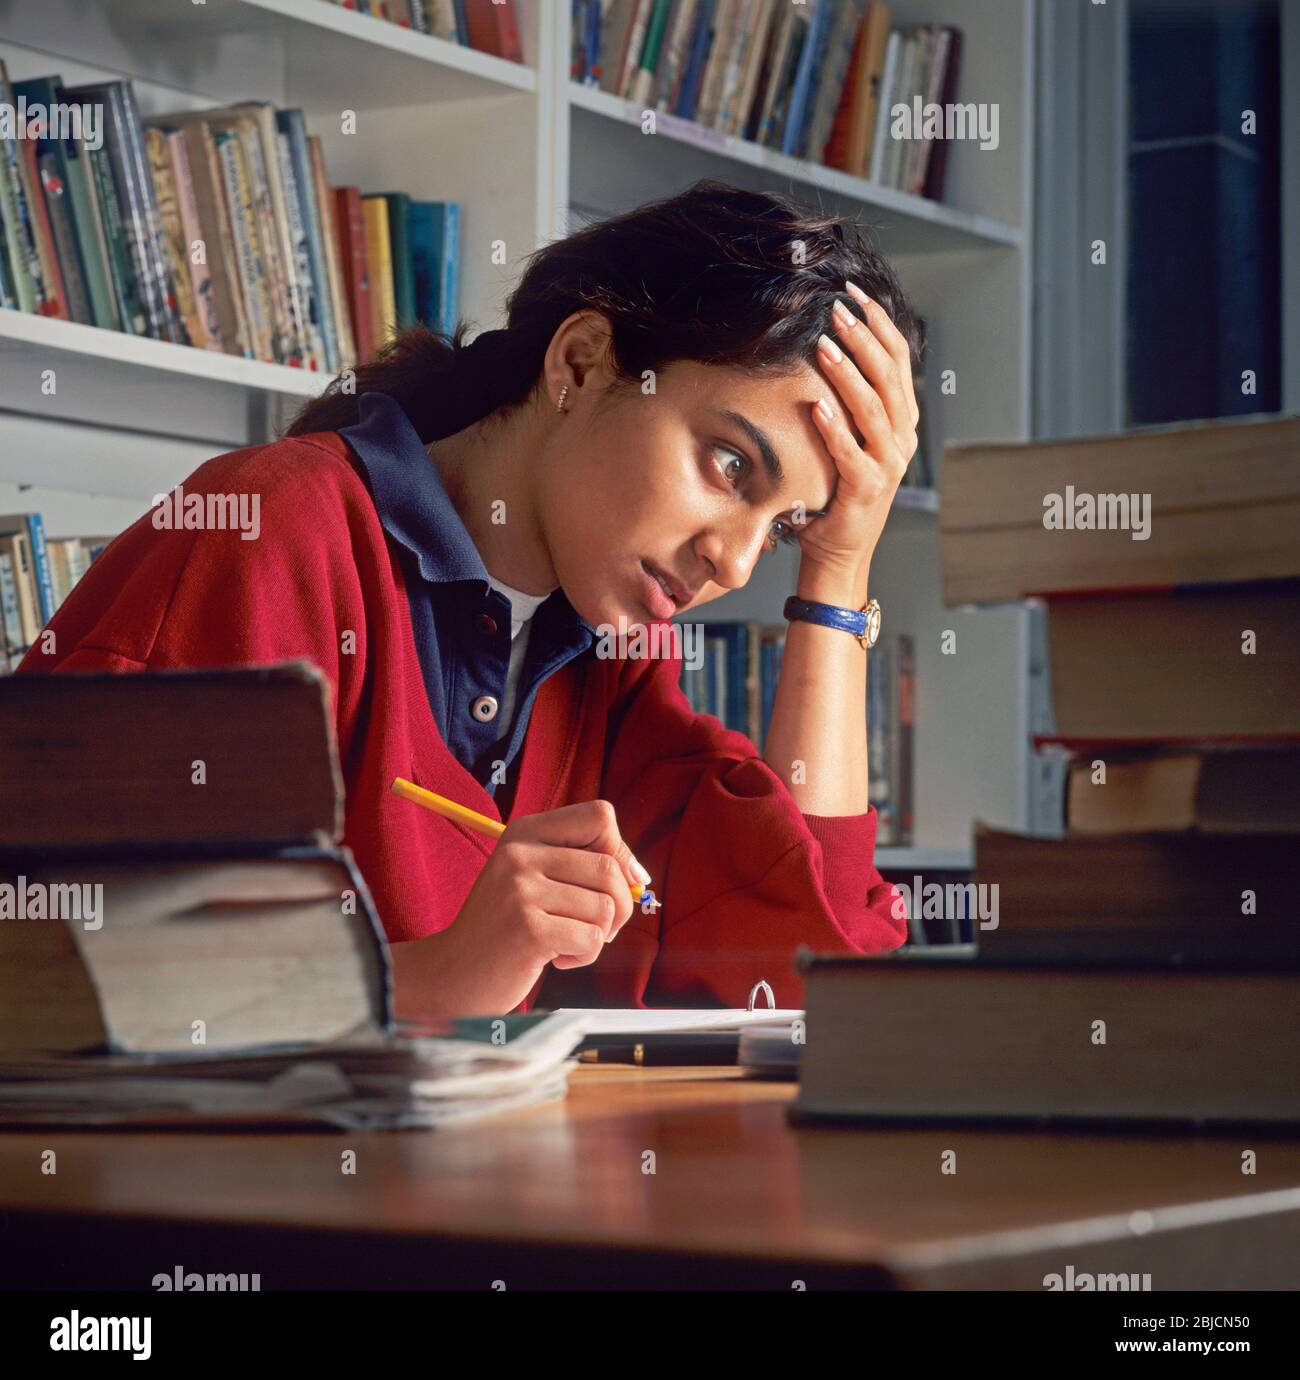 Asian school student girl 15-17yrs concentrating studying intently for exams in school library. Exam & reference books on school library table Stock Photo